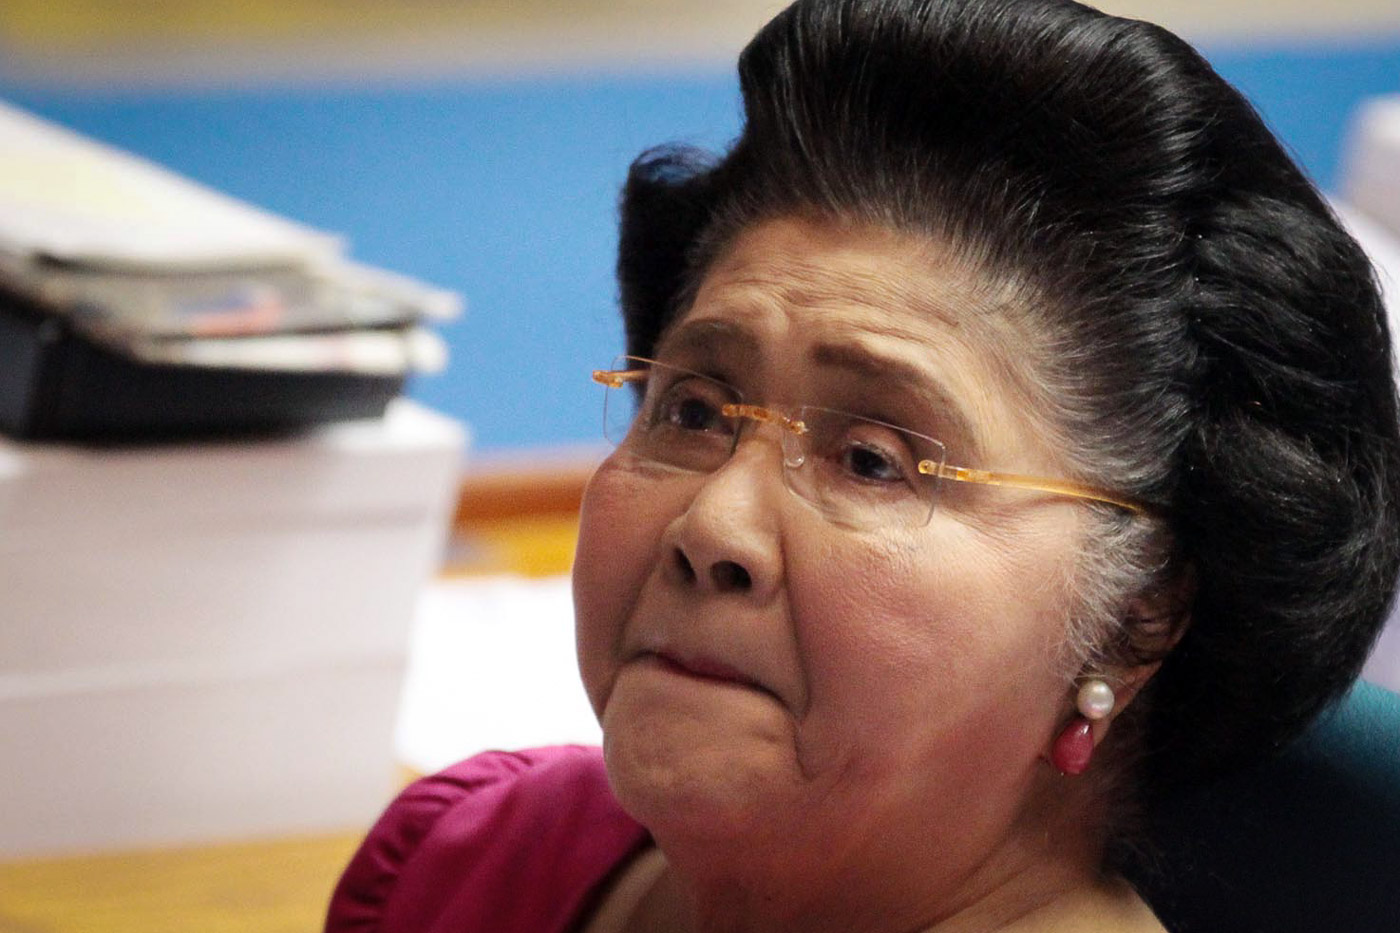 FILING AN APPEAL. Ilocos Norte 2nd District Representative Imelda Marcos will be appealing the guilty verdict handed down to her on November 9, 2018. File photo by Darren Langit/Rappler  